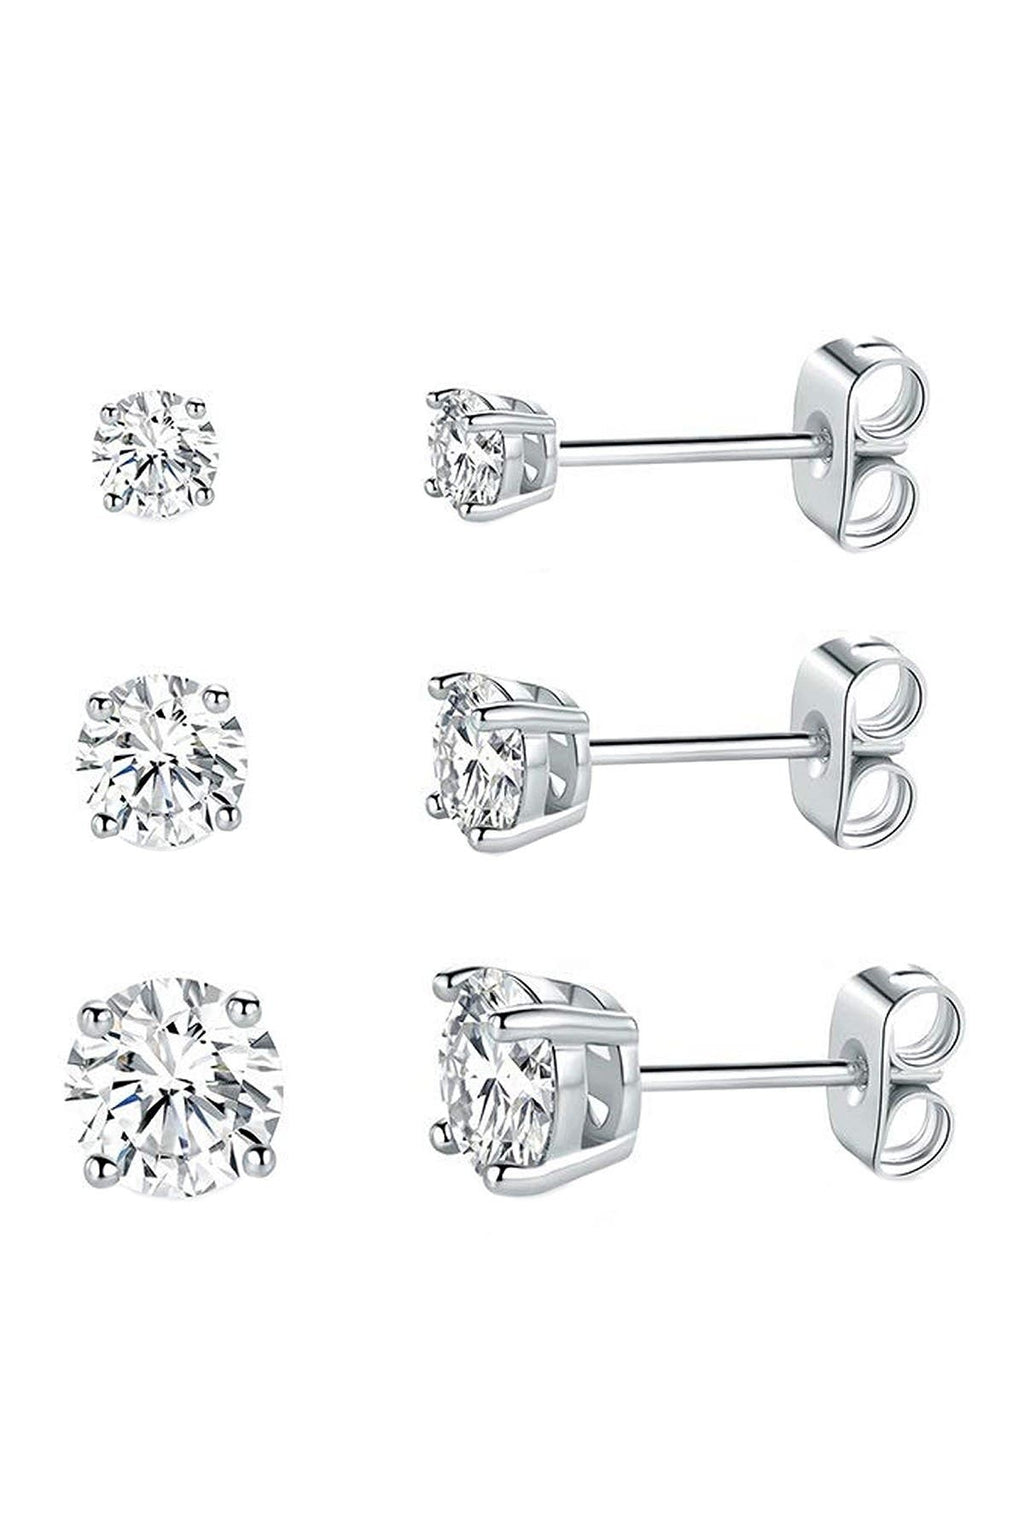 SAVVY CIE JEWELS Sterling Silver Round-Cut Multi Sized CZ Stud Earring Set, Main, color, WHITE